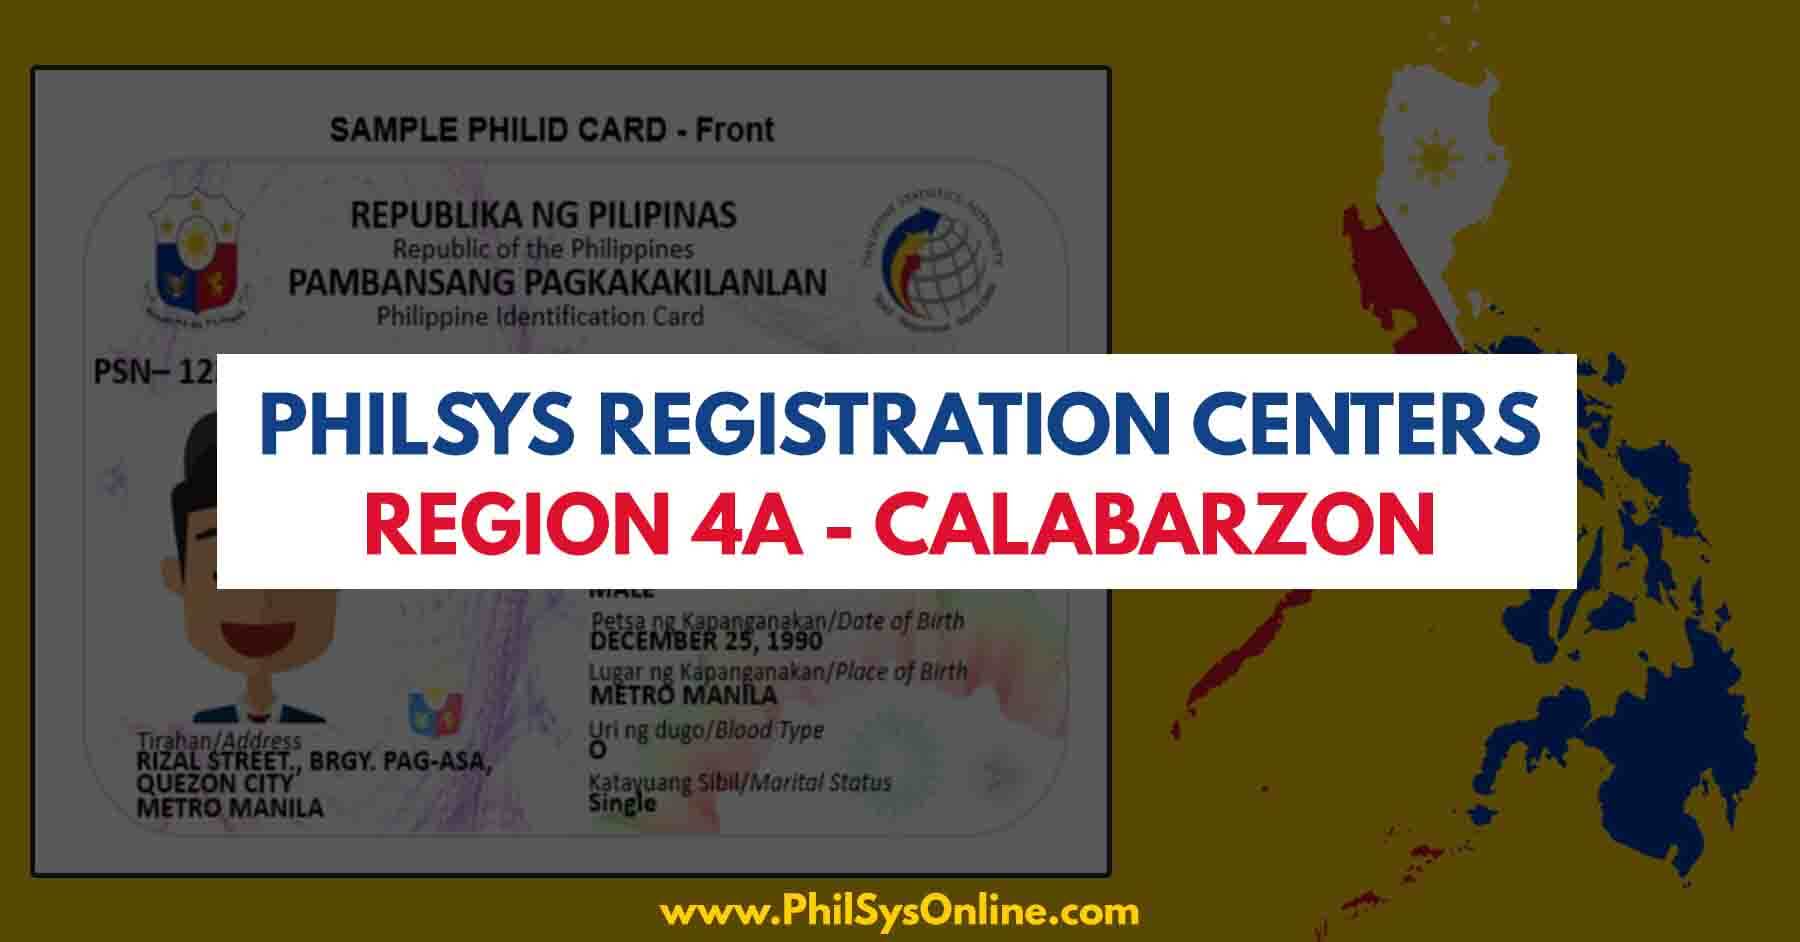 philsys registration centers region 4a calabarzon philippines